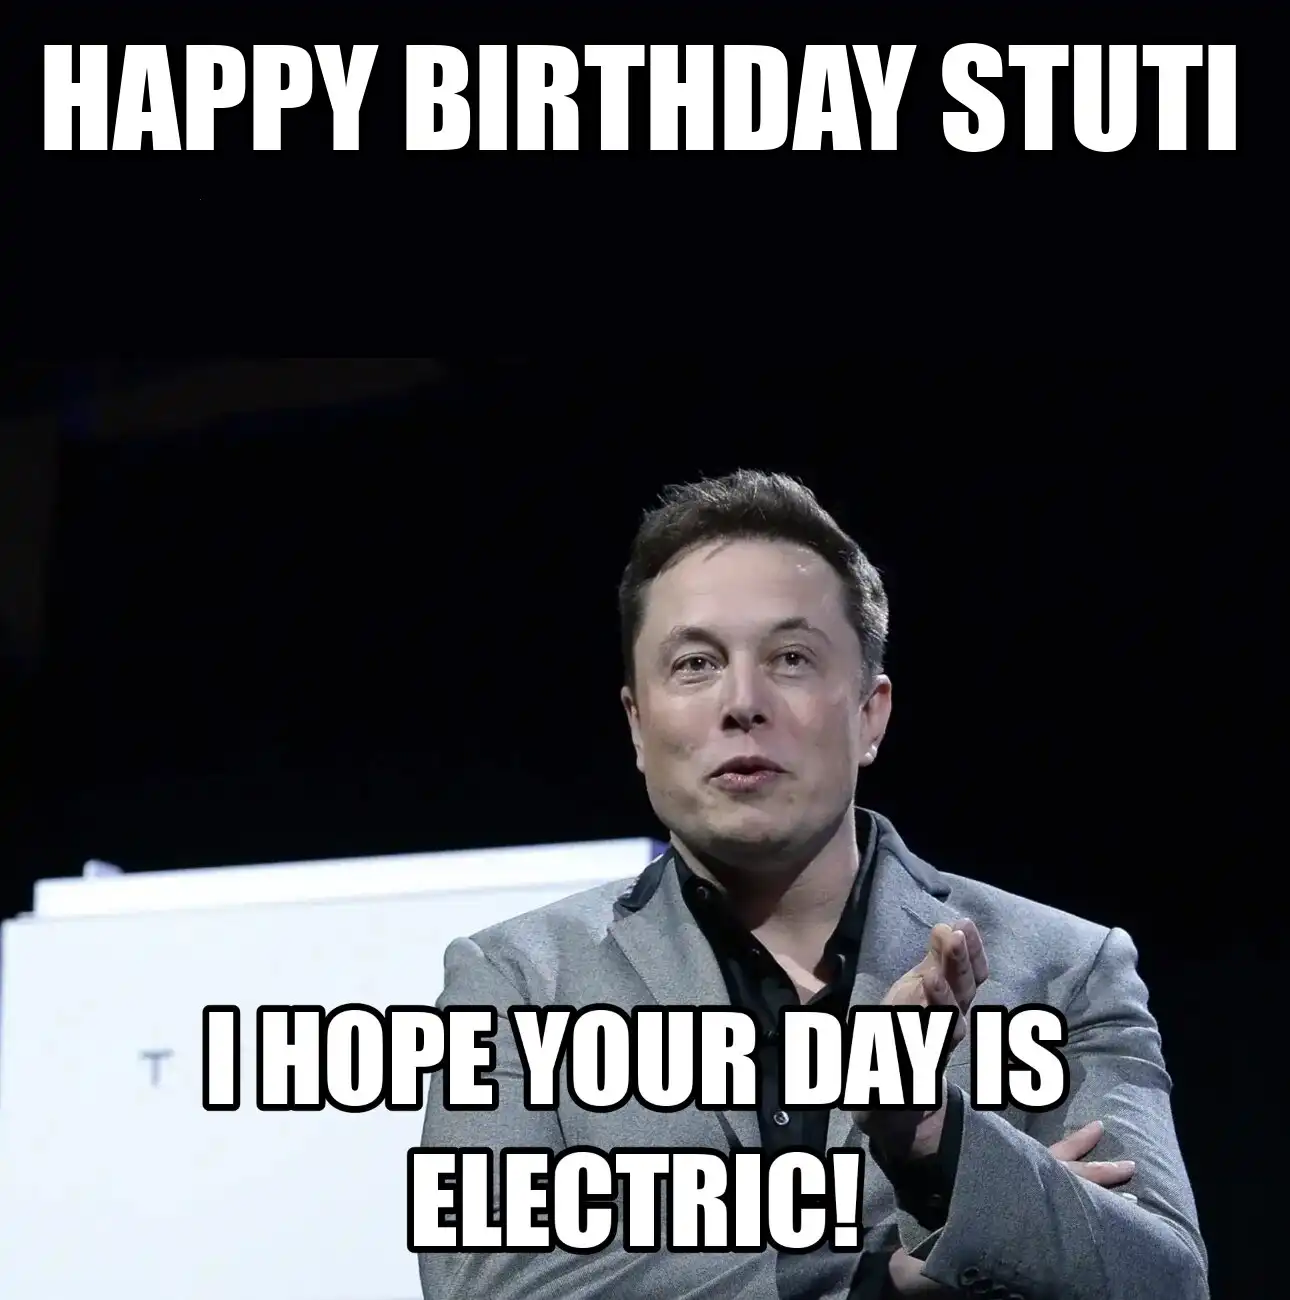 Happy Birthday Stuti I Hope Your Day Is Electric Meme